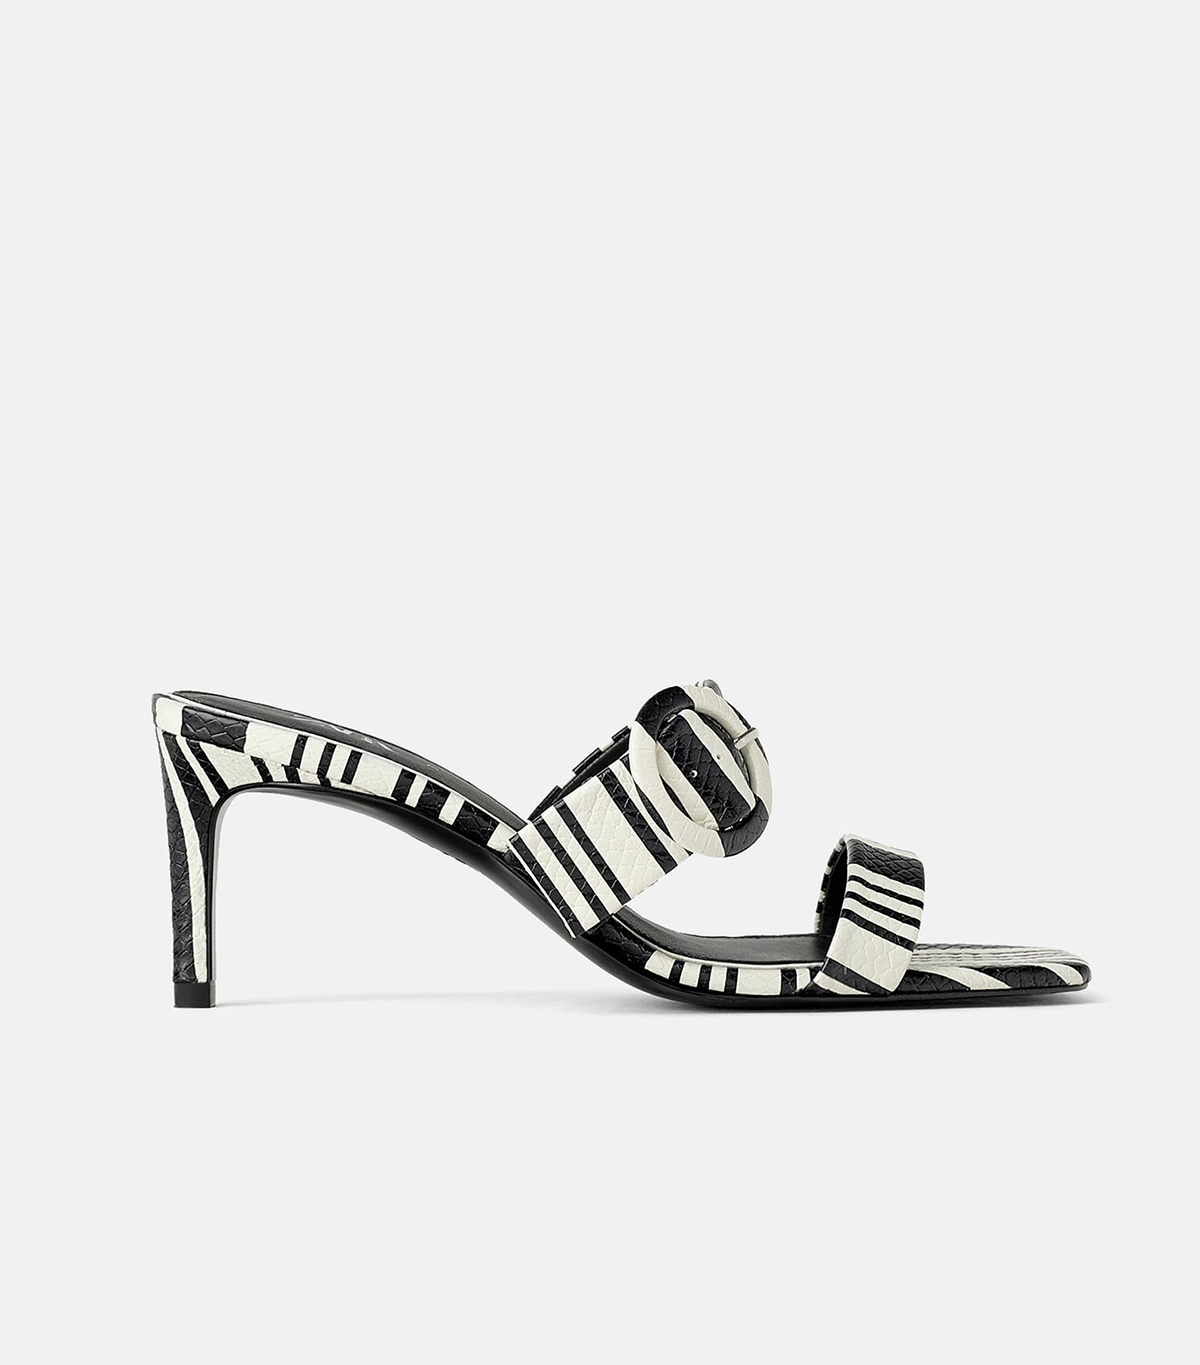 This Random Sandal Trend Is Blowing Up at Zara | Who What Wear